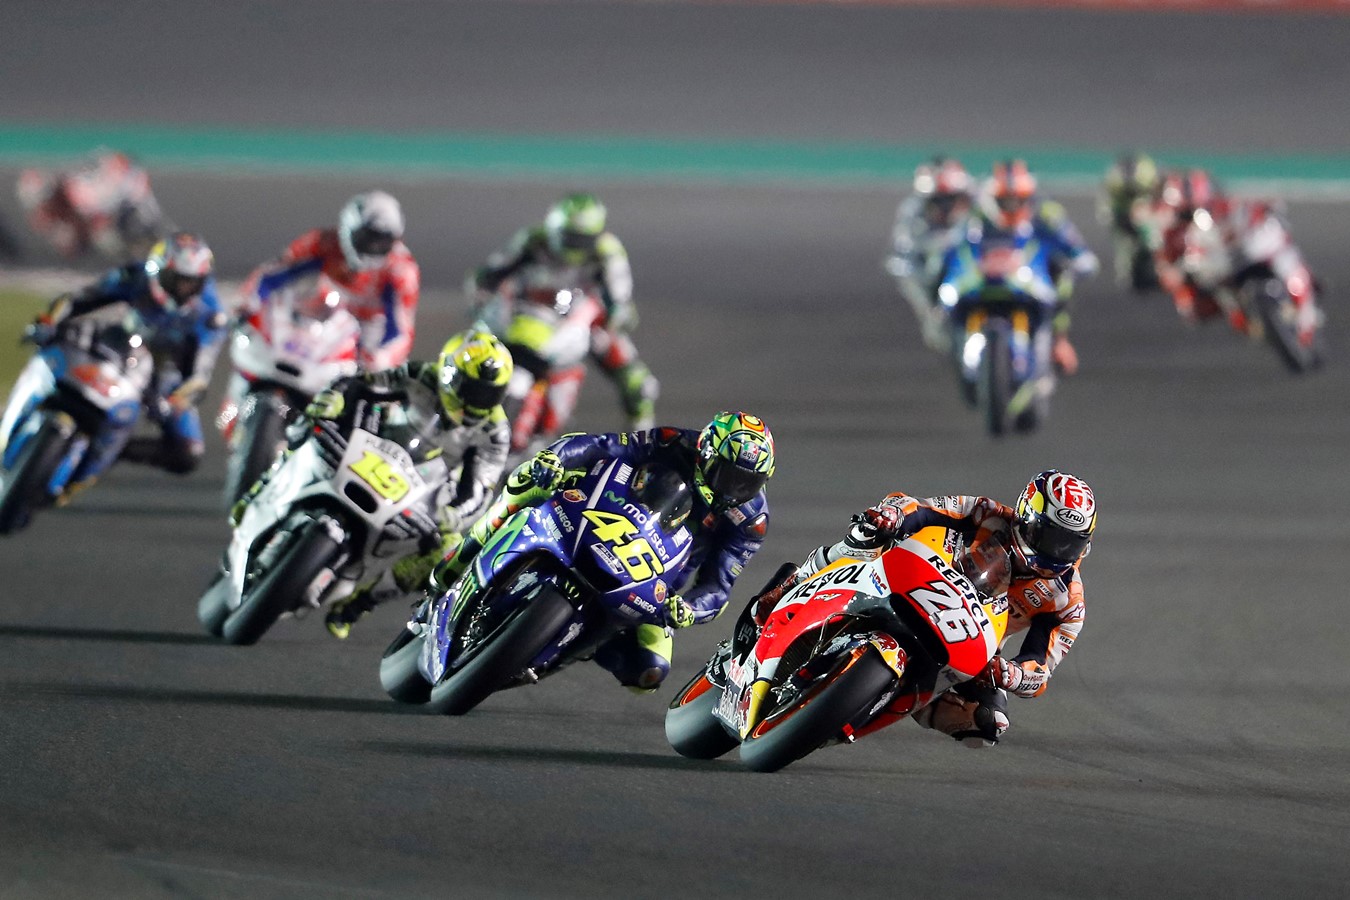 Marquez and Pedrosa Fourth and Fifth in Tricky Qatar Grand Prix